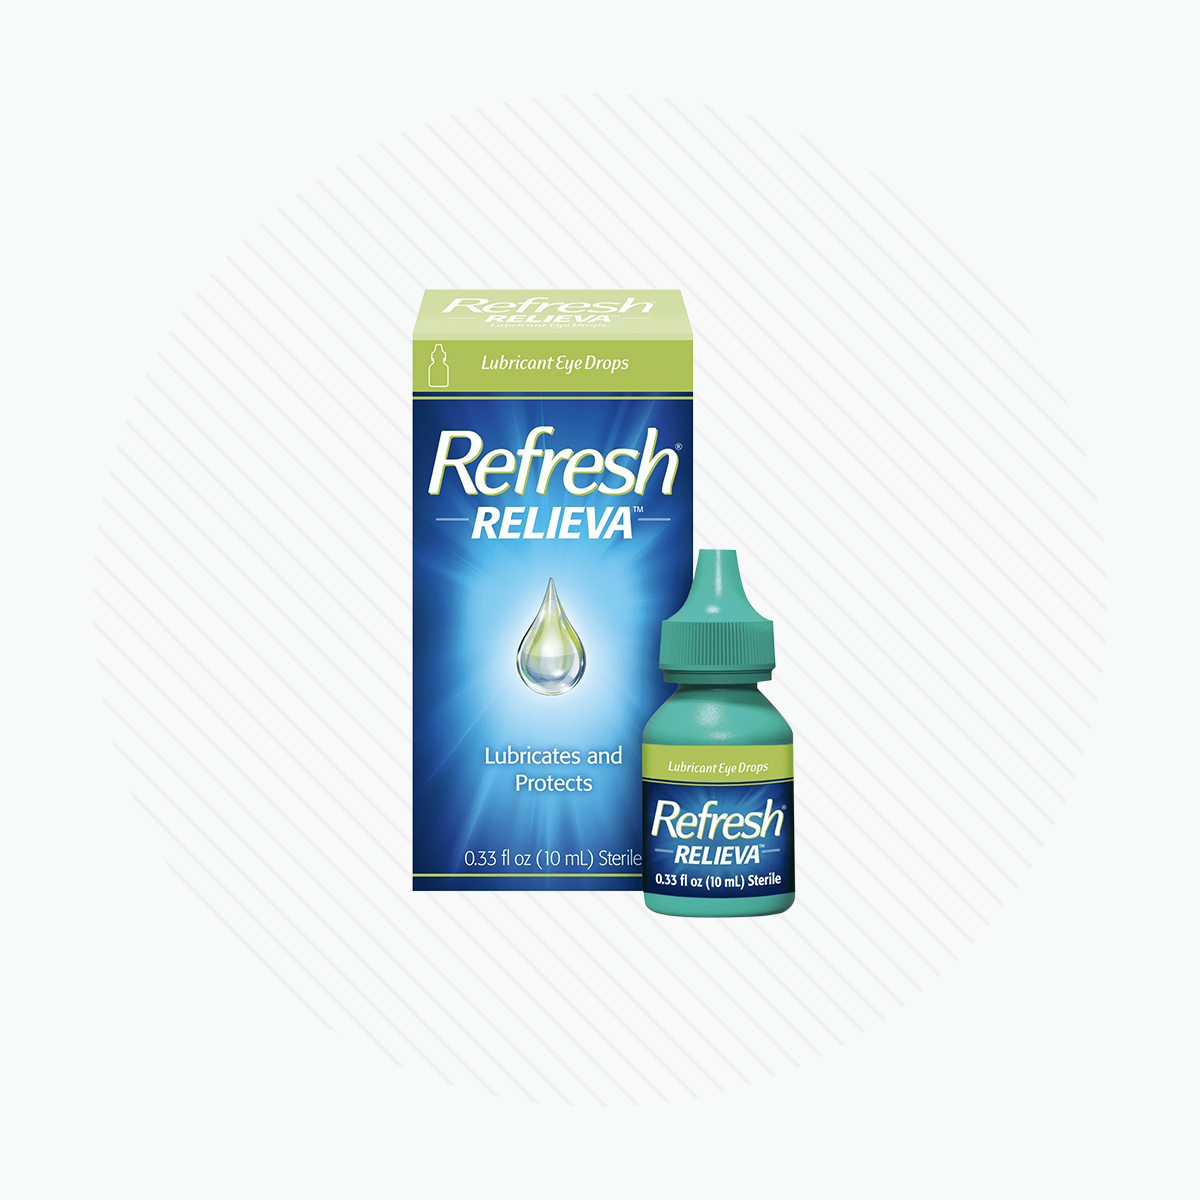 Refresh Relieva Eye Drops to relieve discomfort due to dry, irritated eyes (10mL)